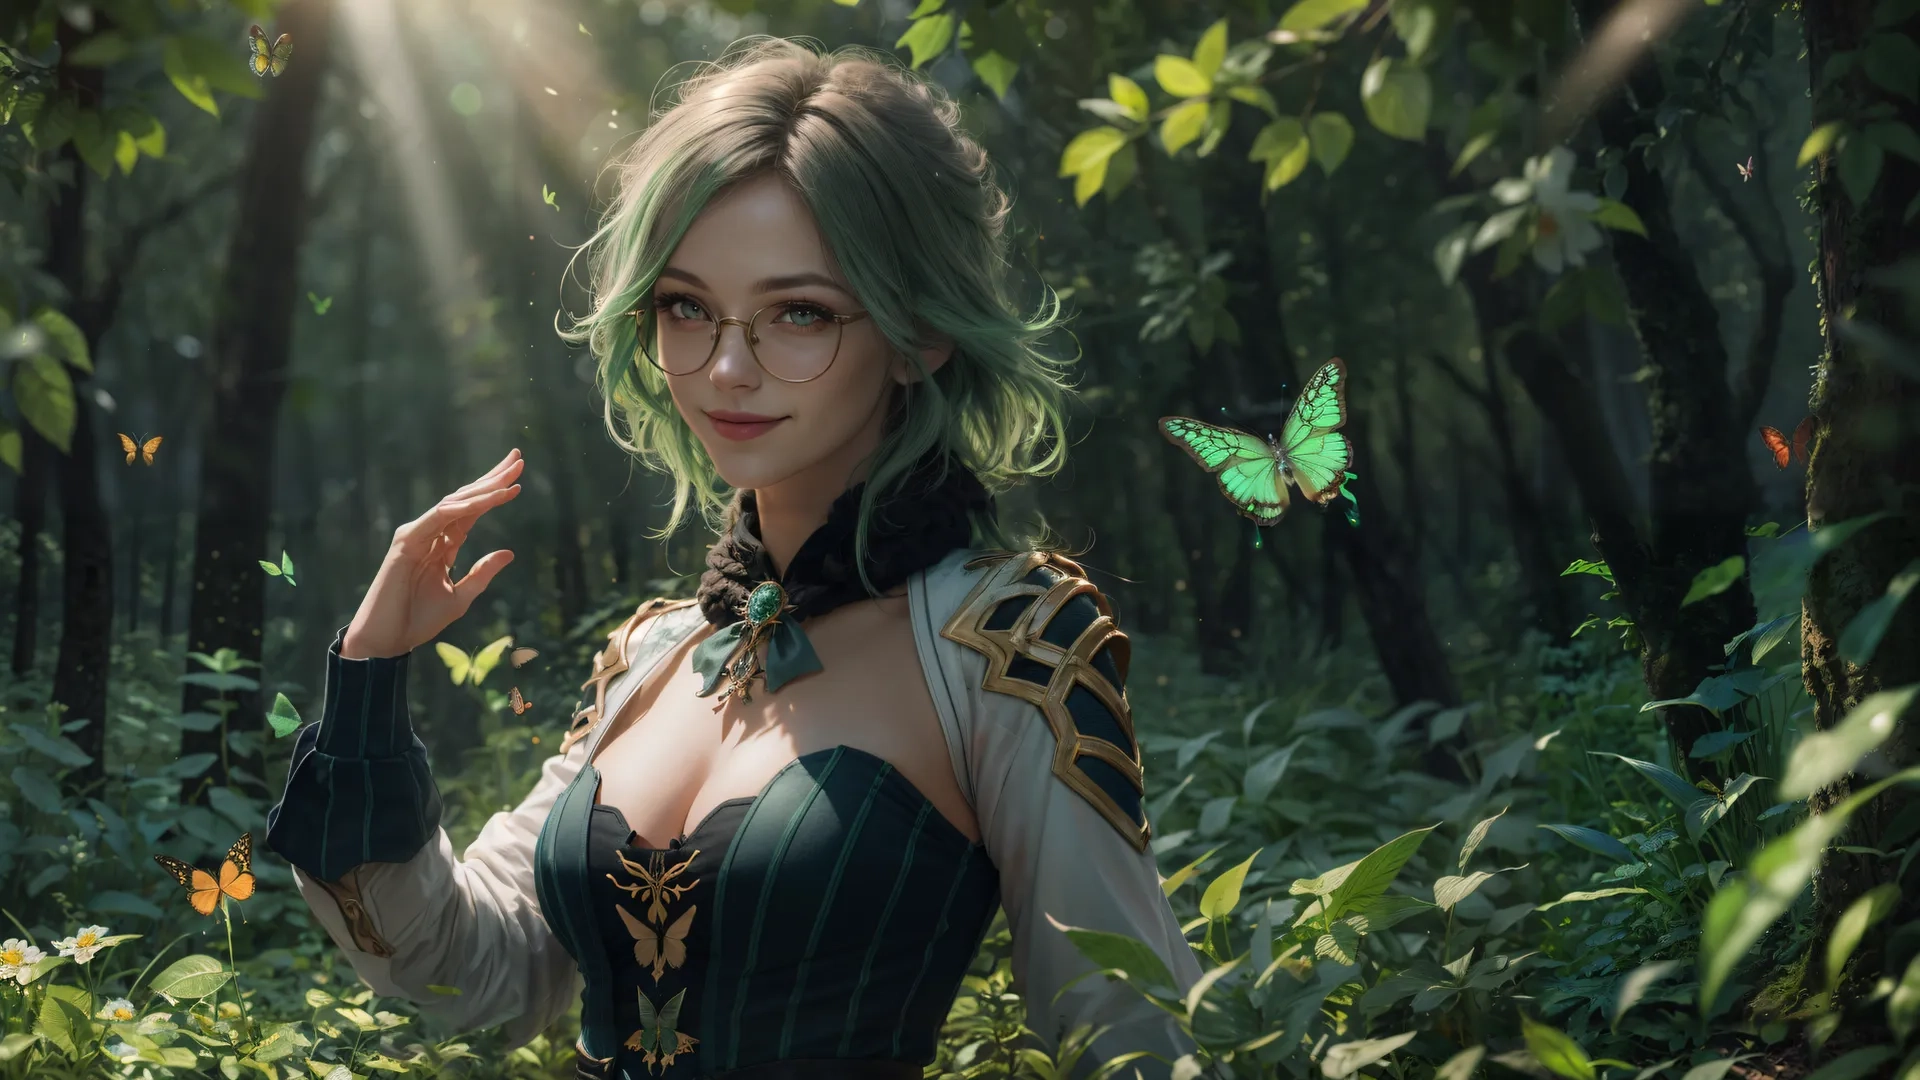 cosplay girl with green hair in the forest holding her arm out to the sunlit side of her face with butterflies in trees
